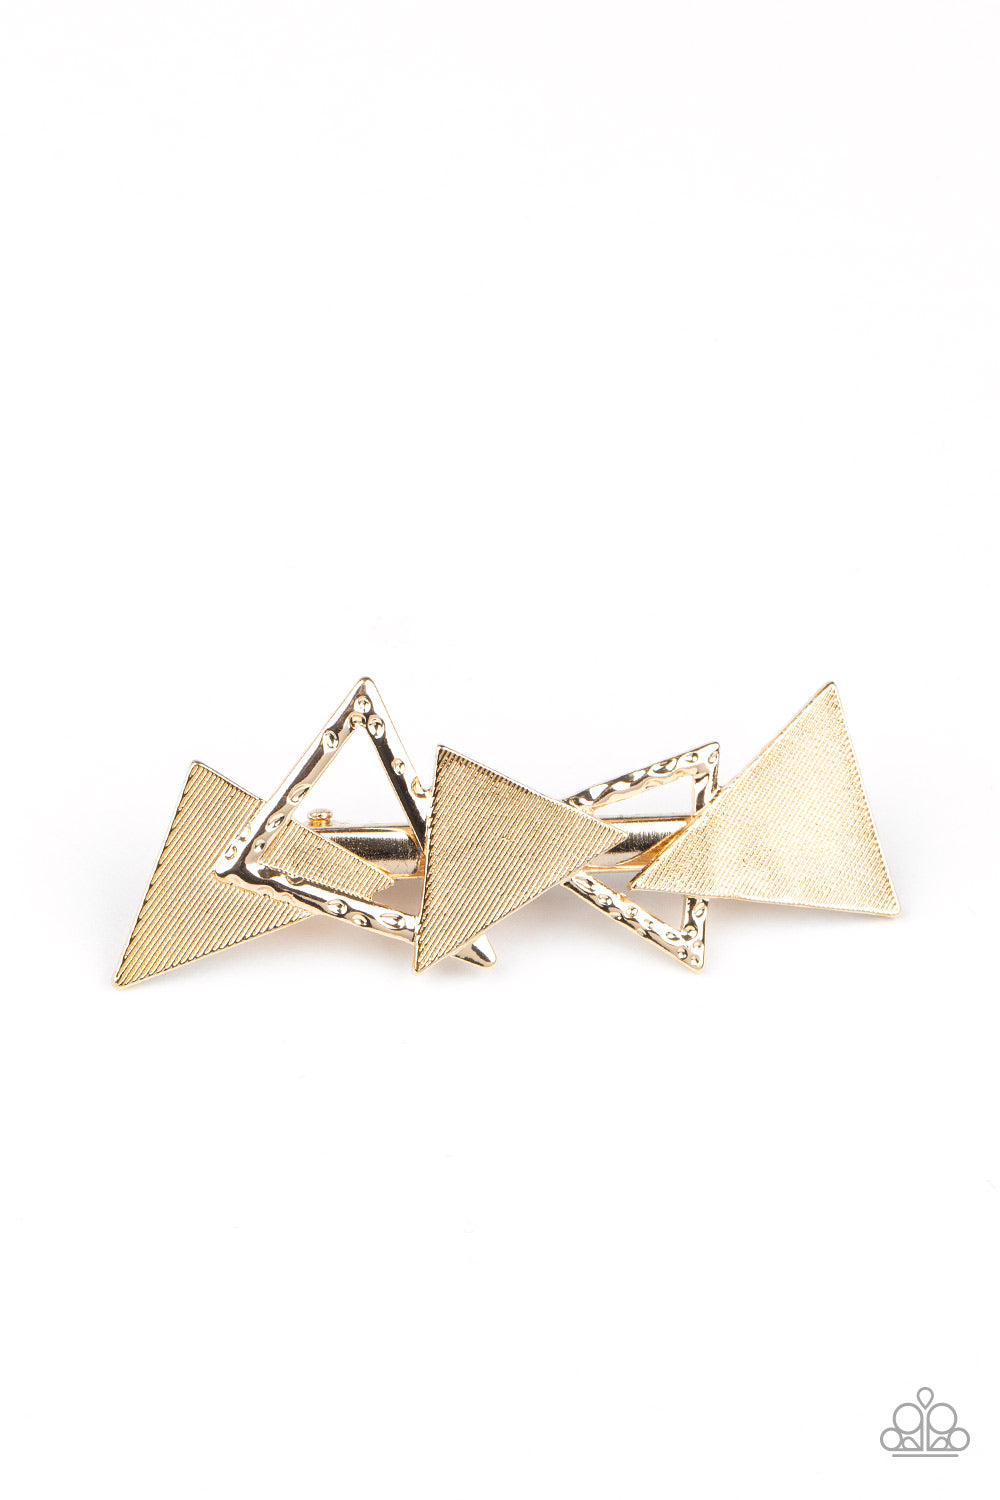 Know All The TRIANGLES Hair Clip (Gold, Silver)